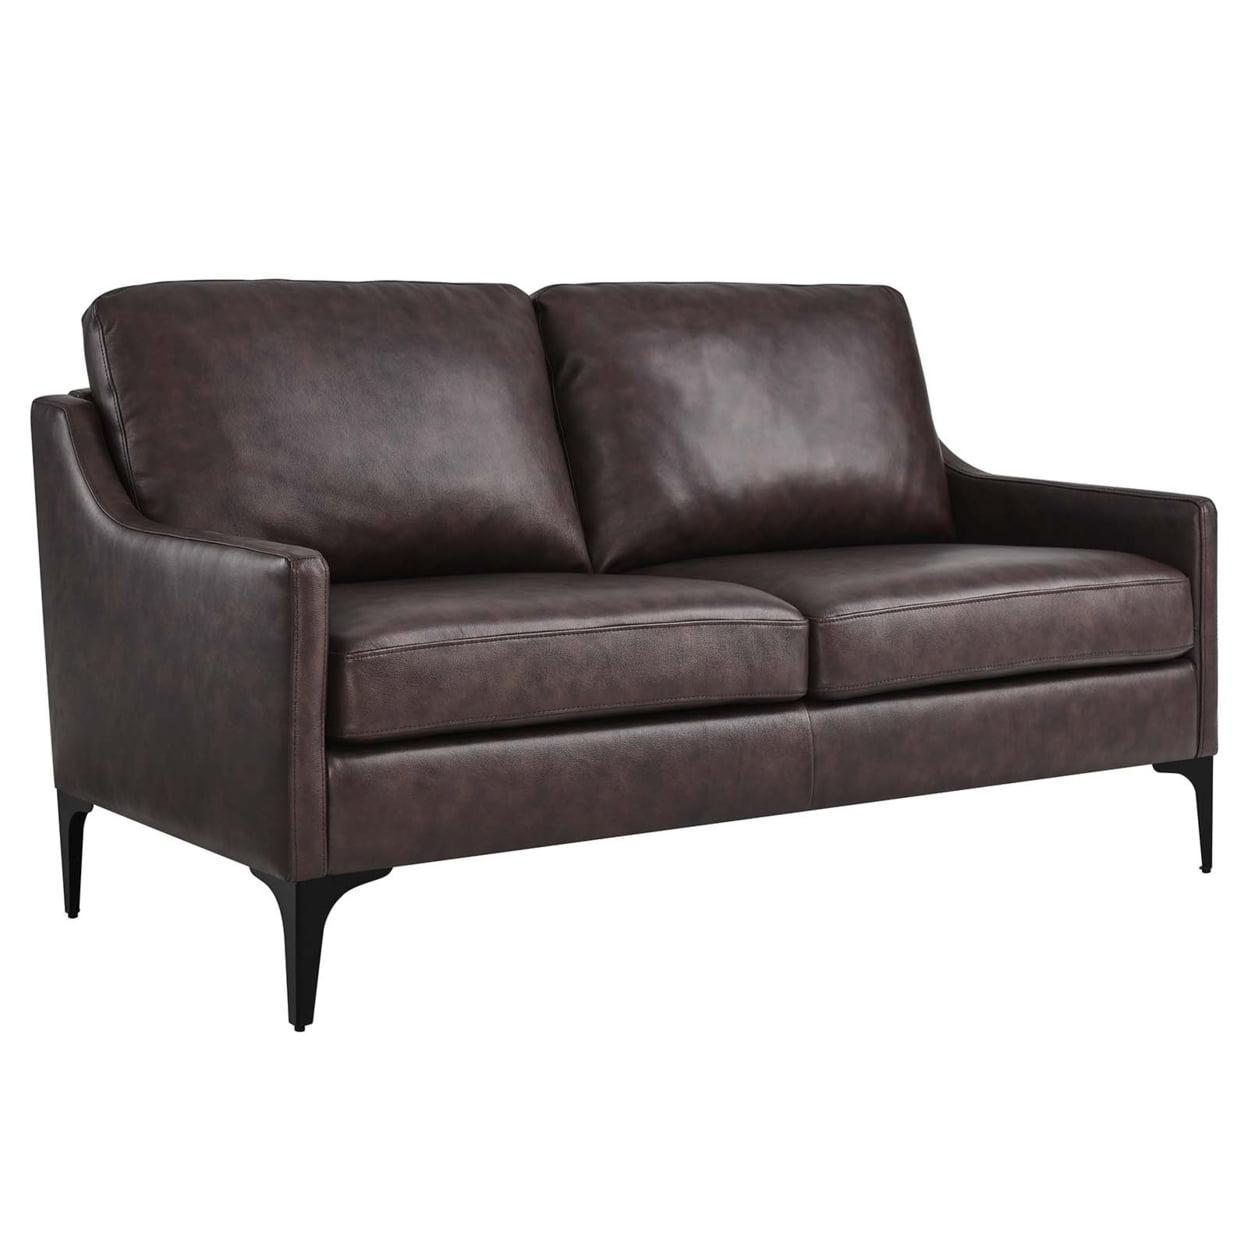 Mid-Century Modern Brown Faux Leather Loveseat with Removable Cushions